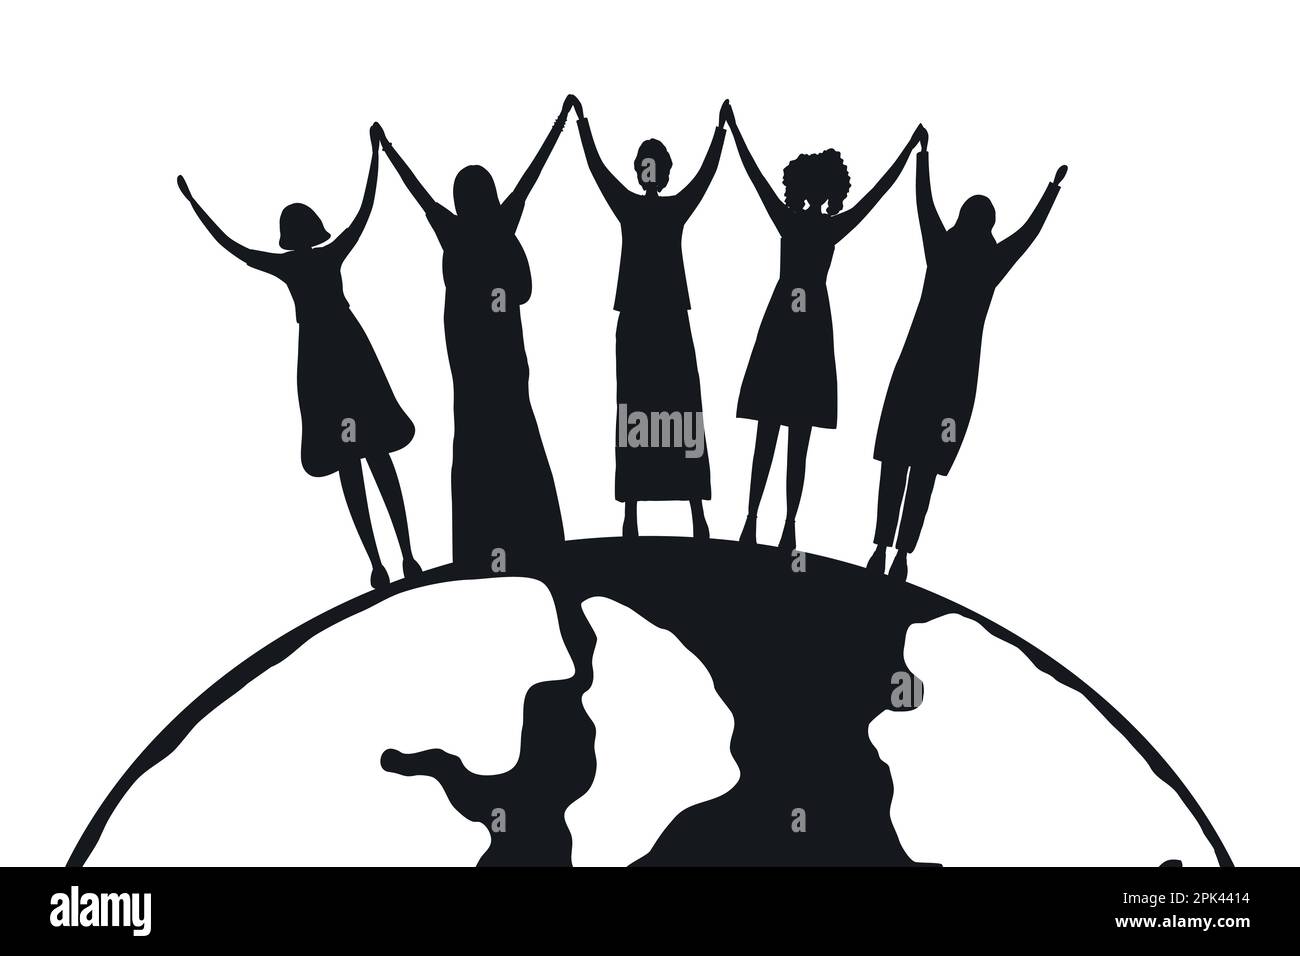 Black silhouettes of women. International Women's Day concept. Women holding hands, stand on the globe background. Women's community. Female solidarit Stock Vector